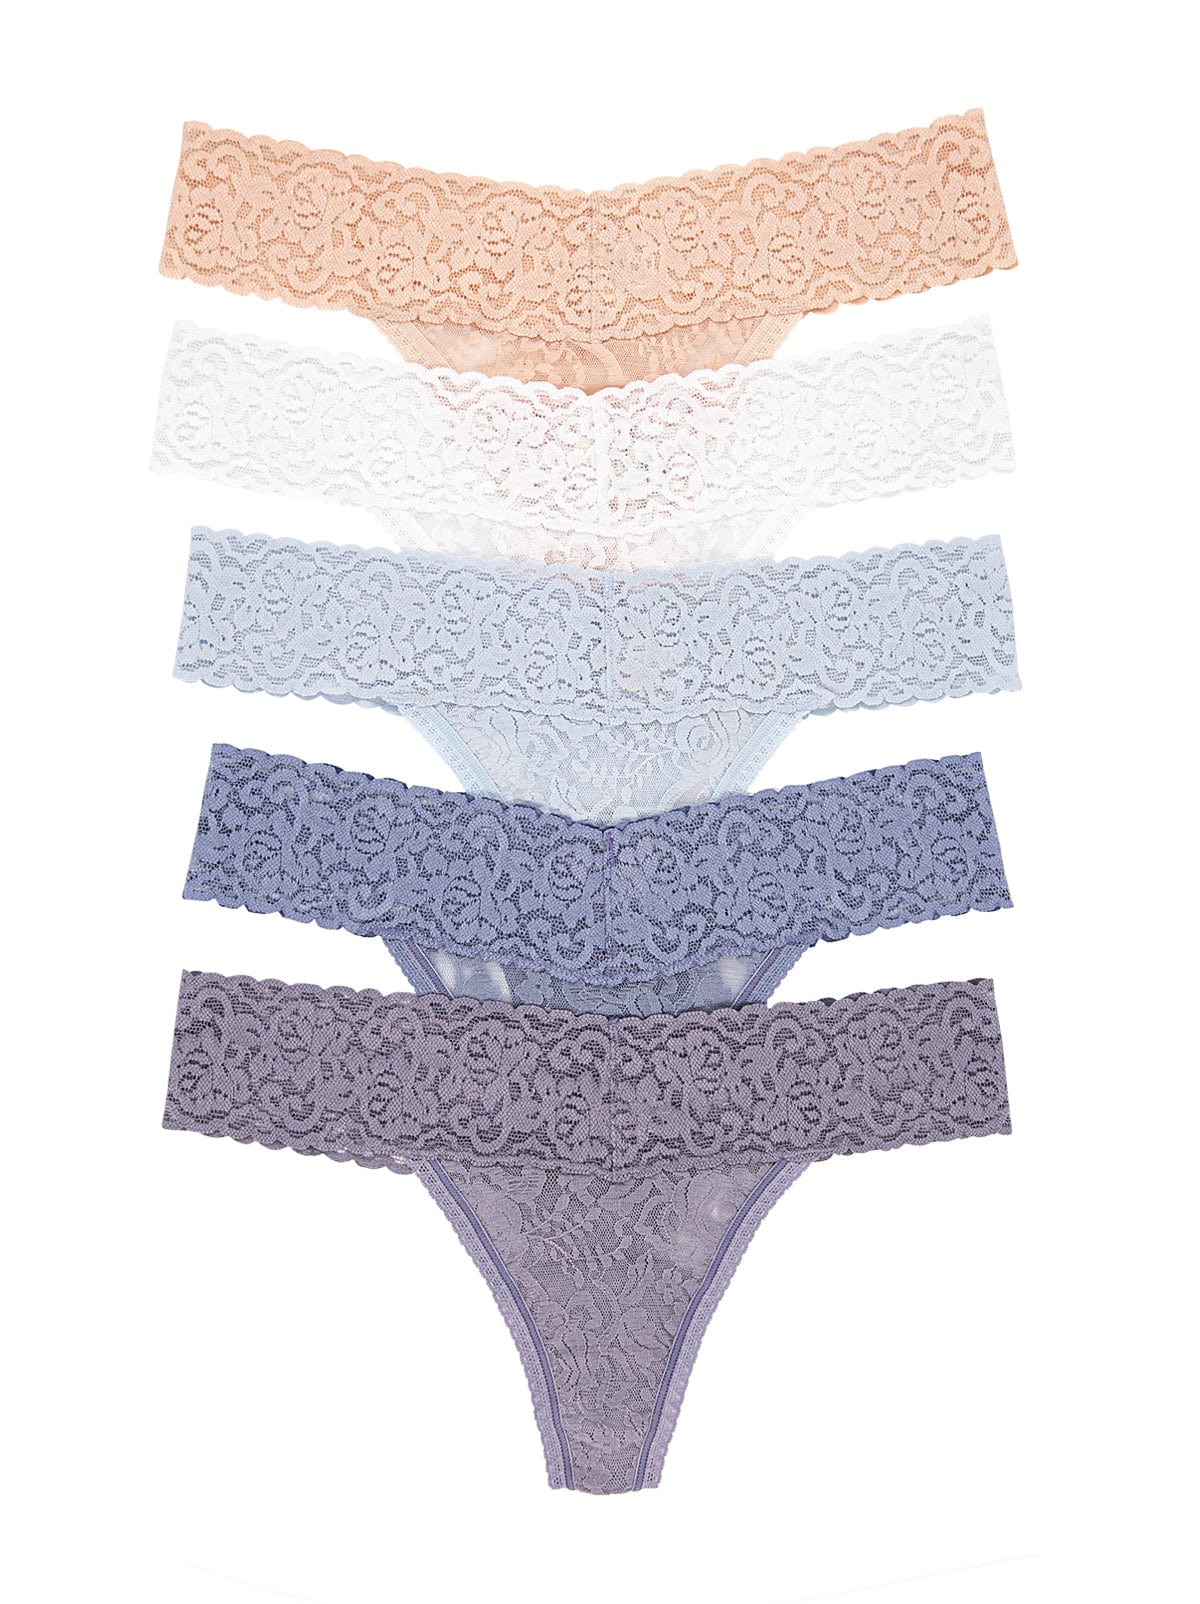 Image of Signature Stretchy Lace Thong 5-Pack